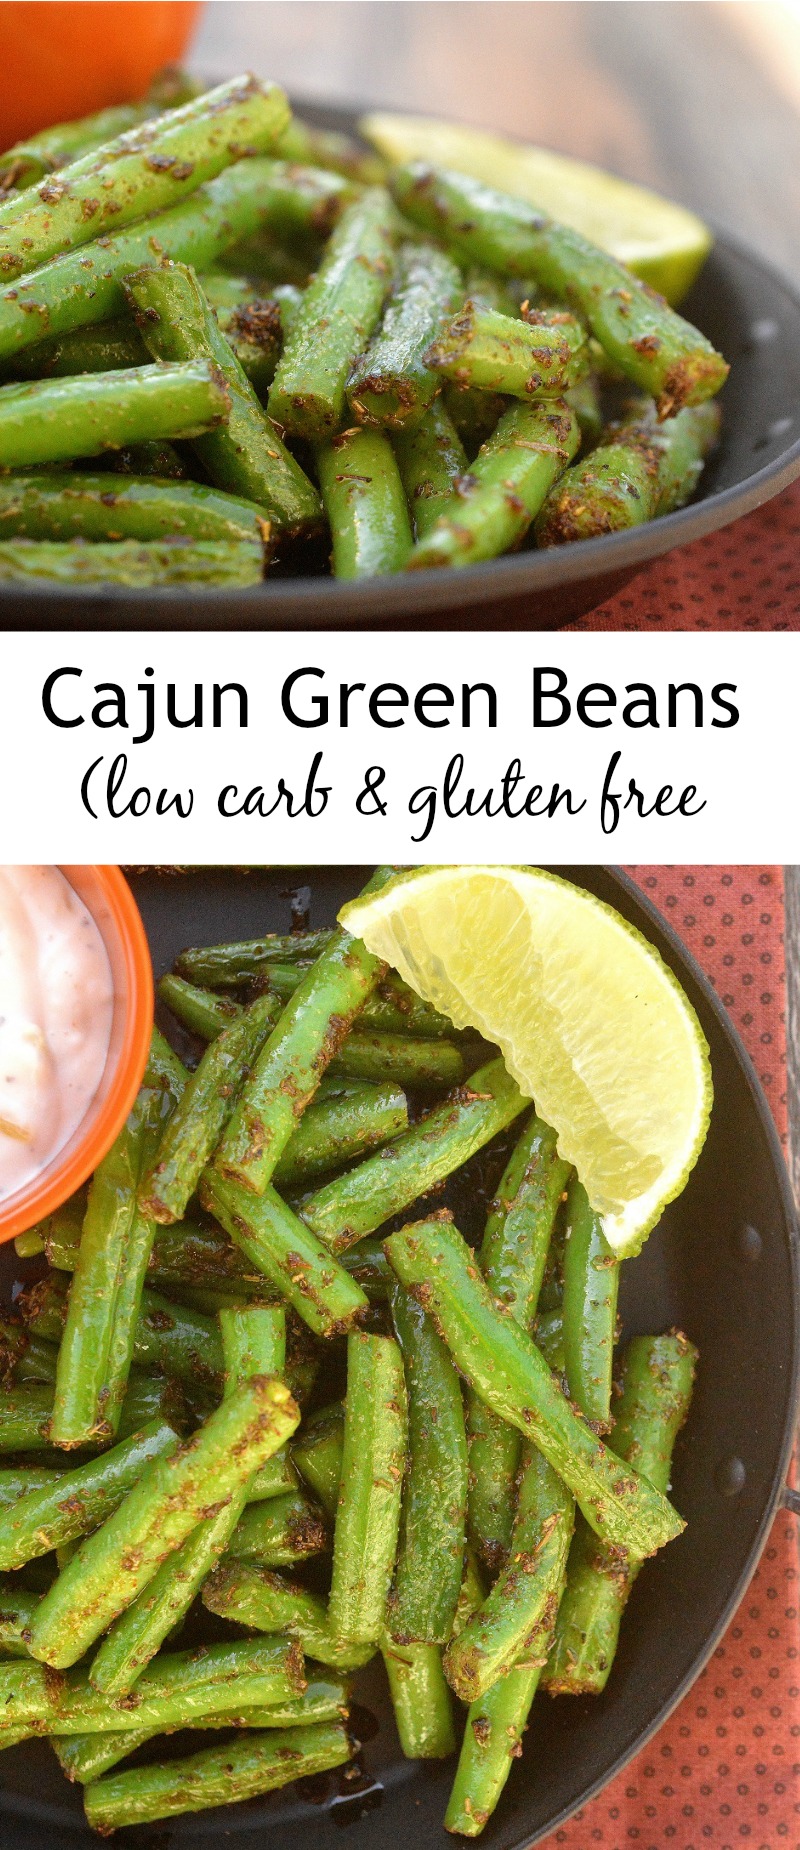 Cajun Green Beans. Easy, Delicious, Low Carb & Gluten Free